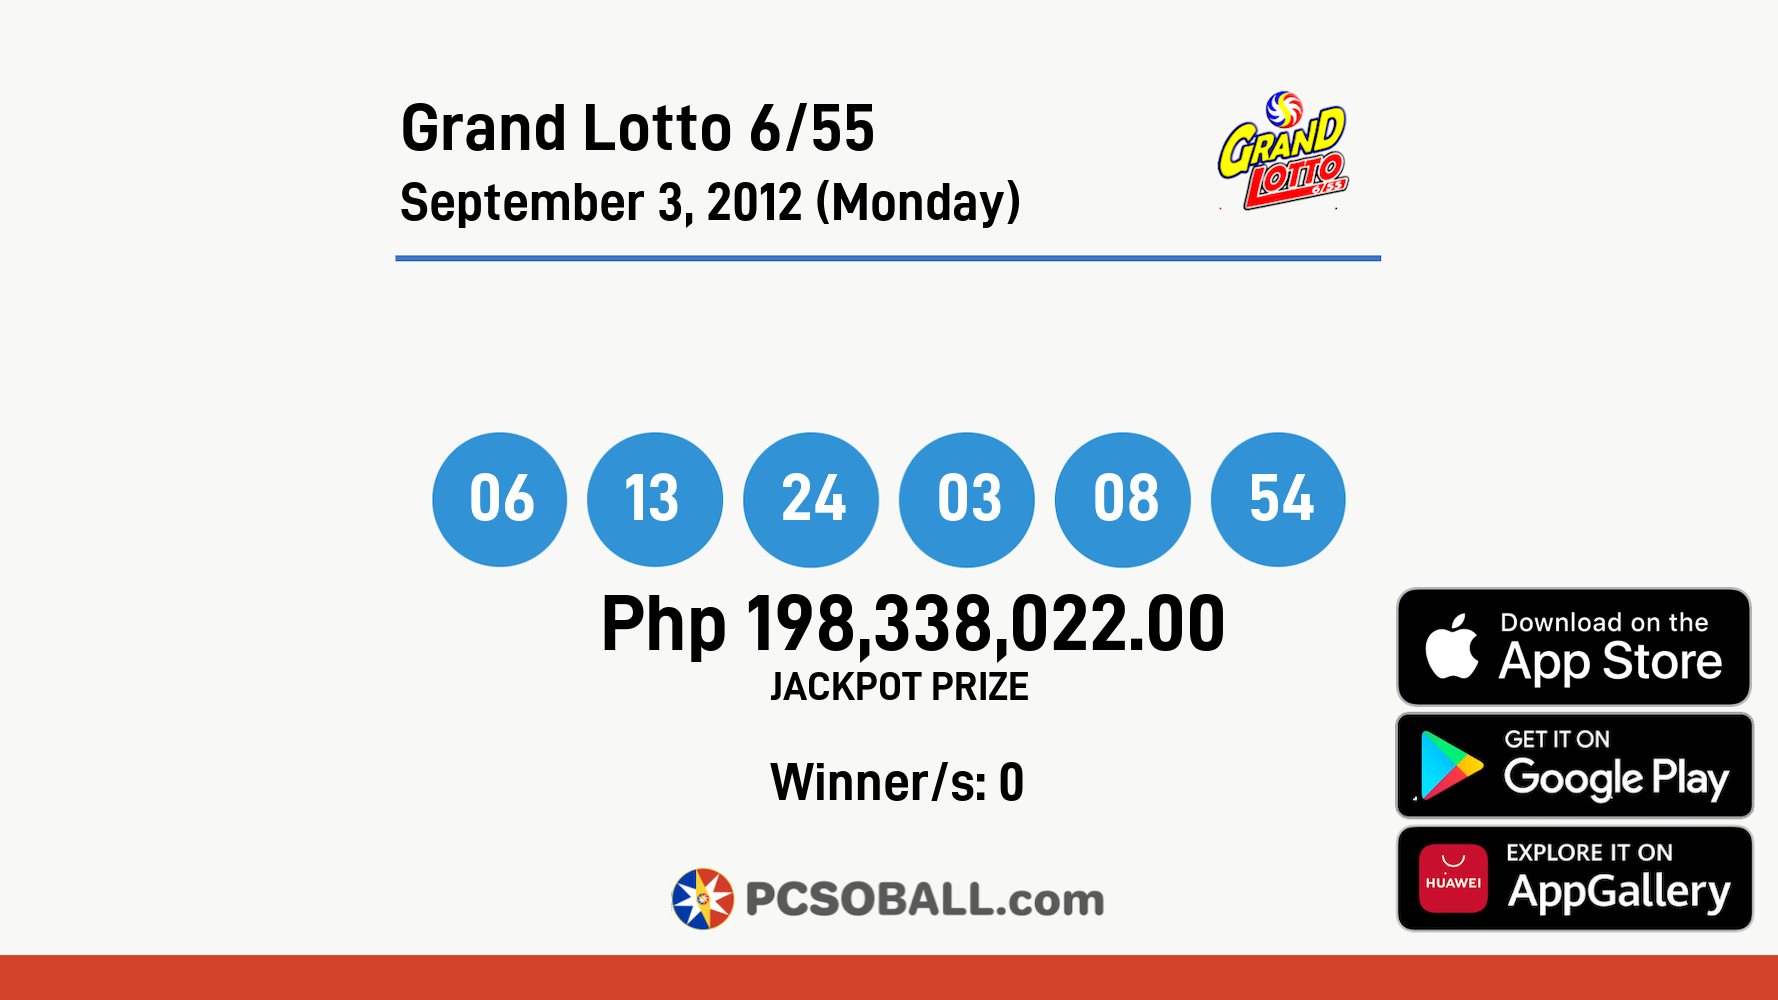 Grand Lotto 6/55 September 3, 2012 (Monday) Result